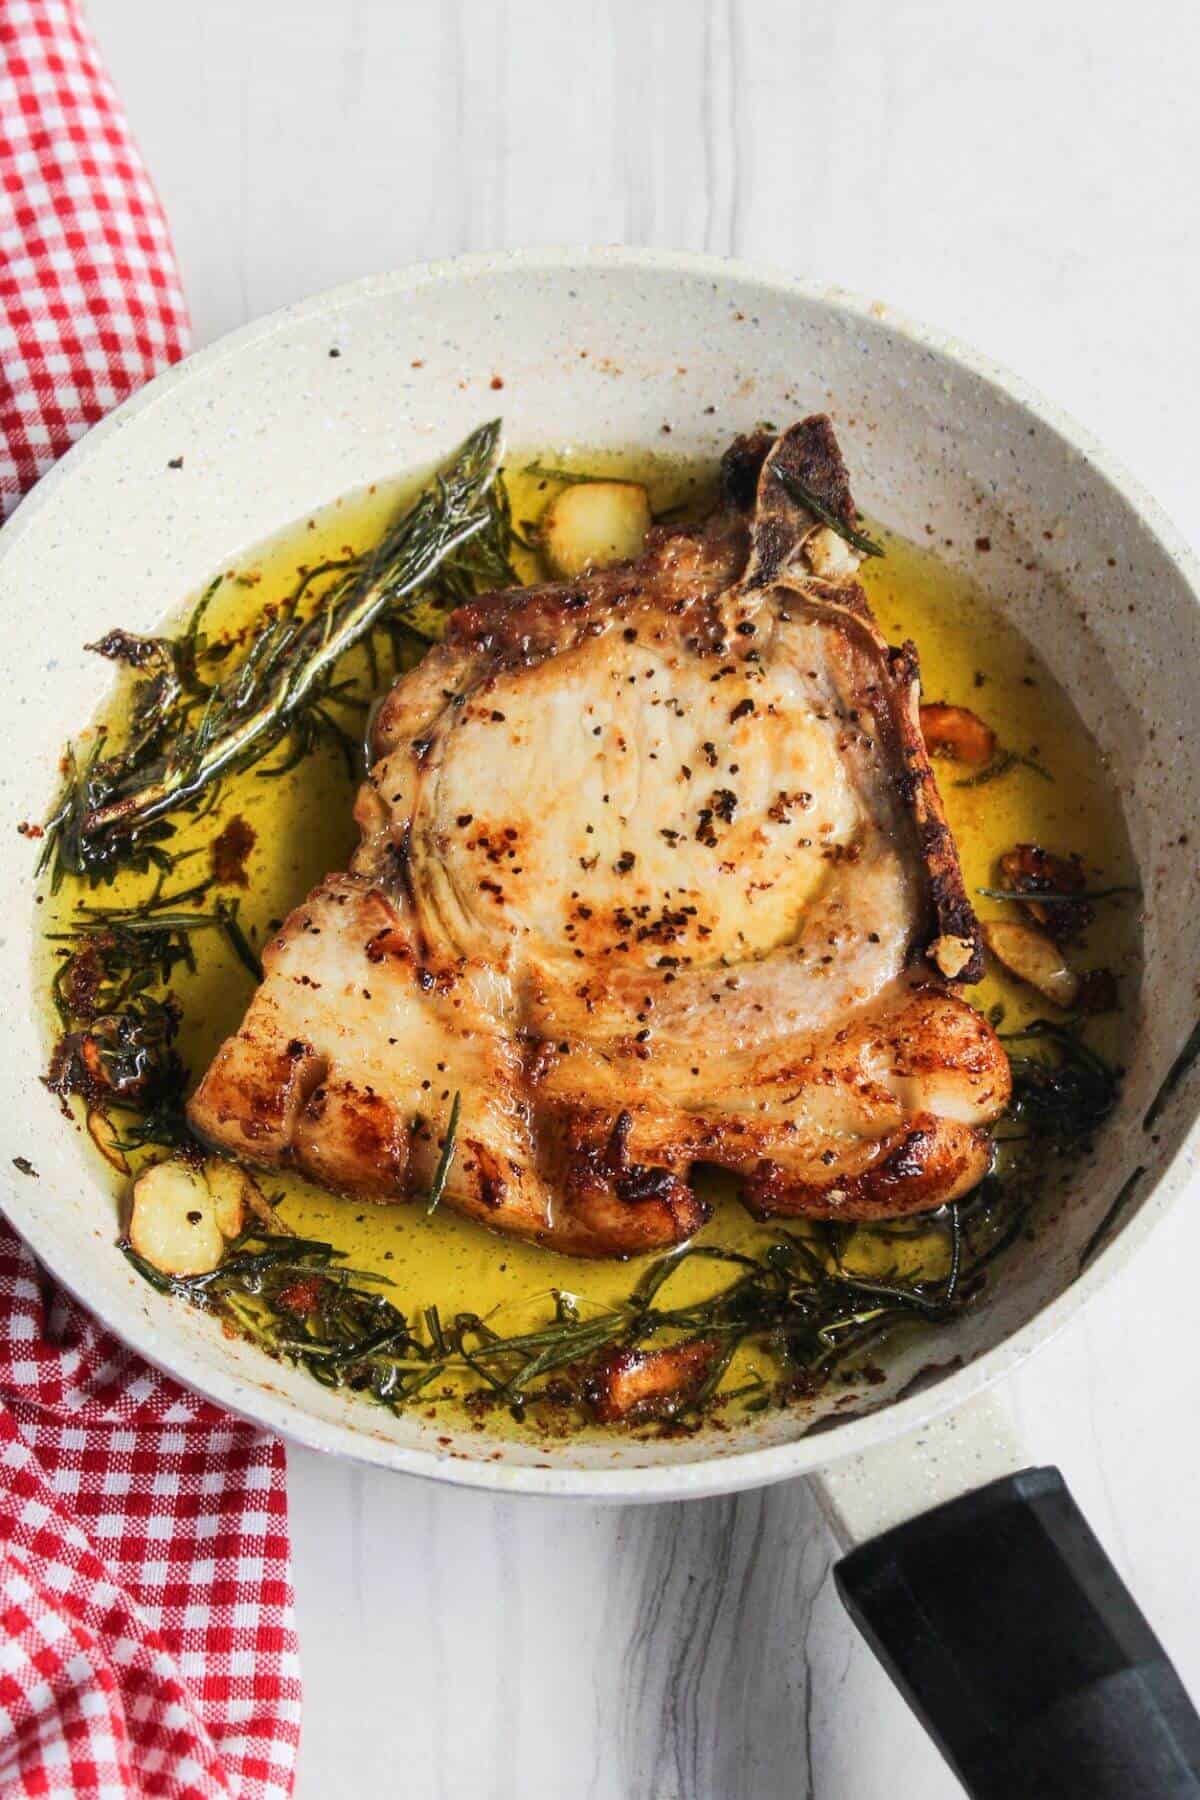 Pork chop in a frying pan with herbs and garlic.